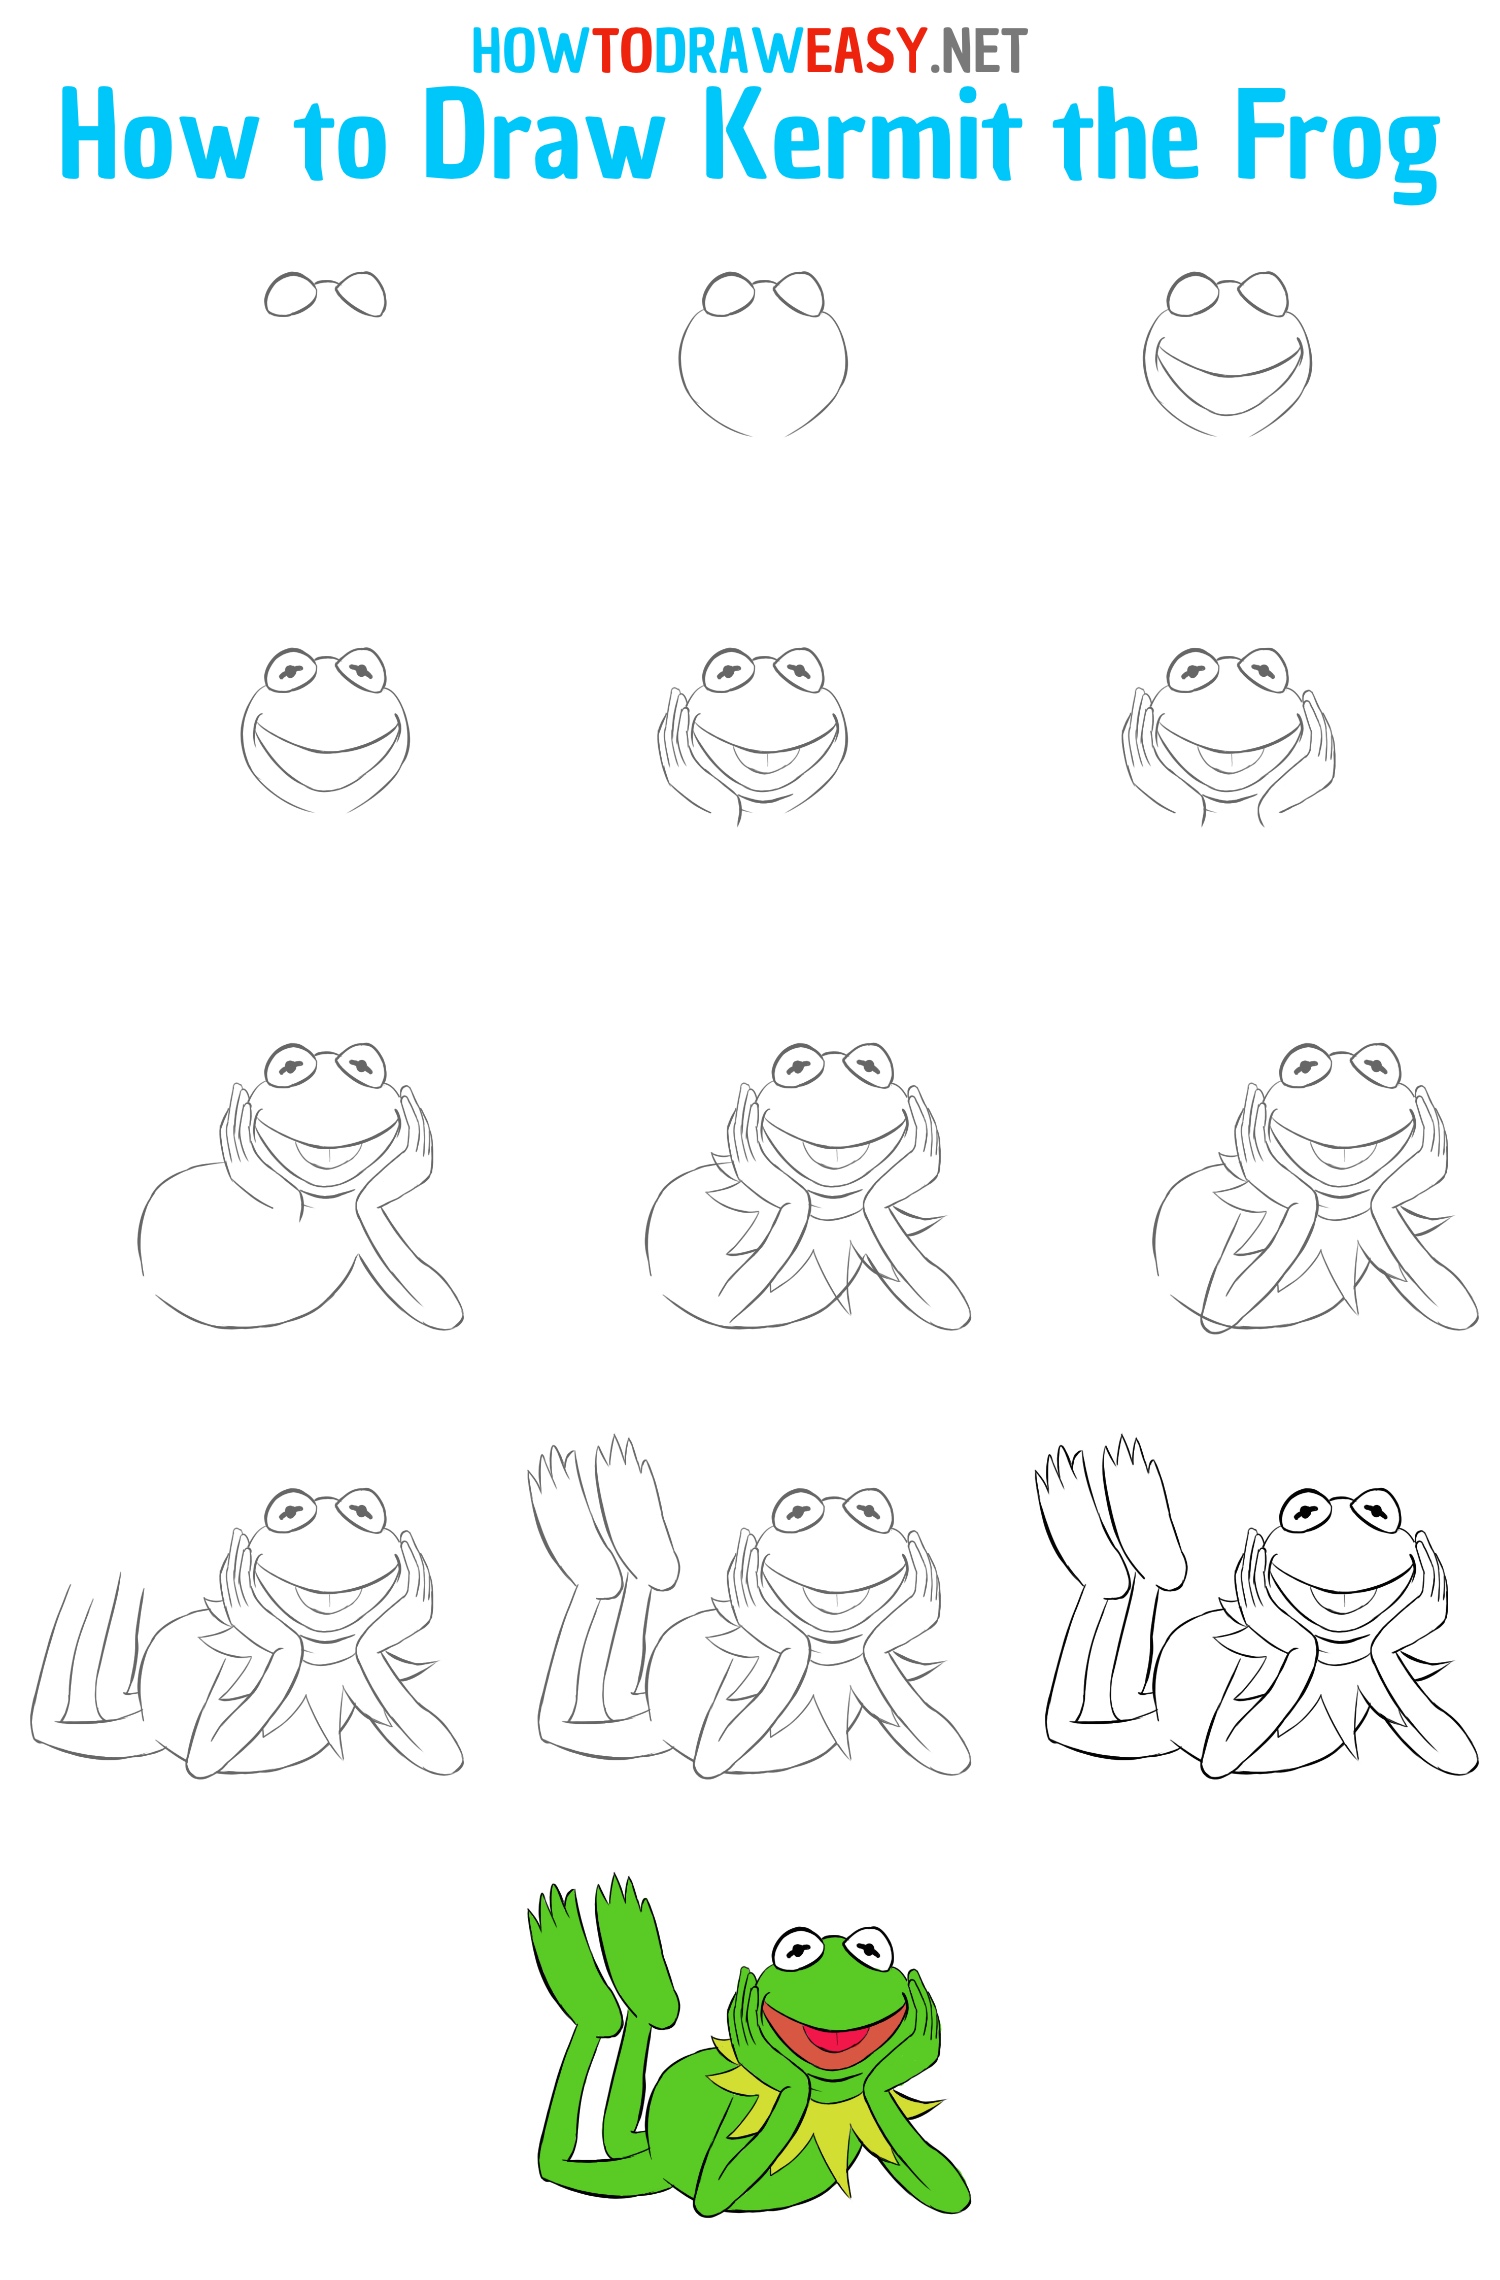 How to Draw Kermit the Frog Step by Step